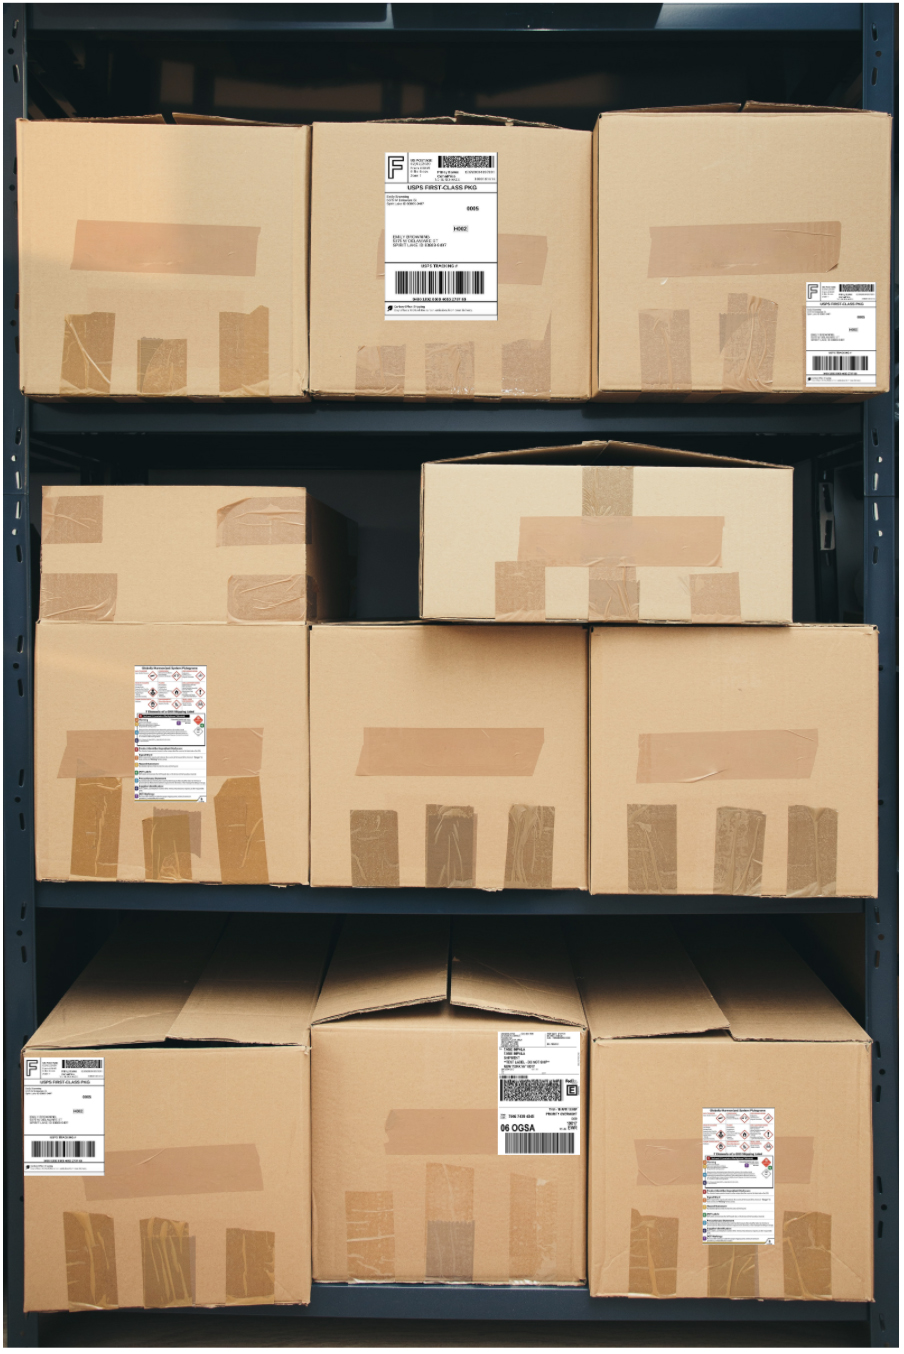 Parcels with BOUNTE Parcel Tracking Labels